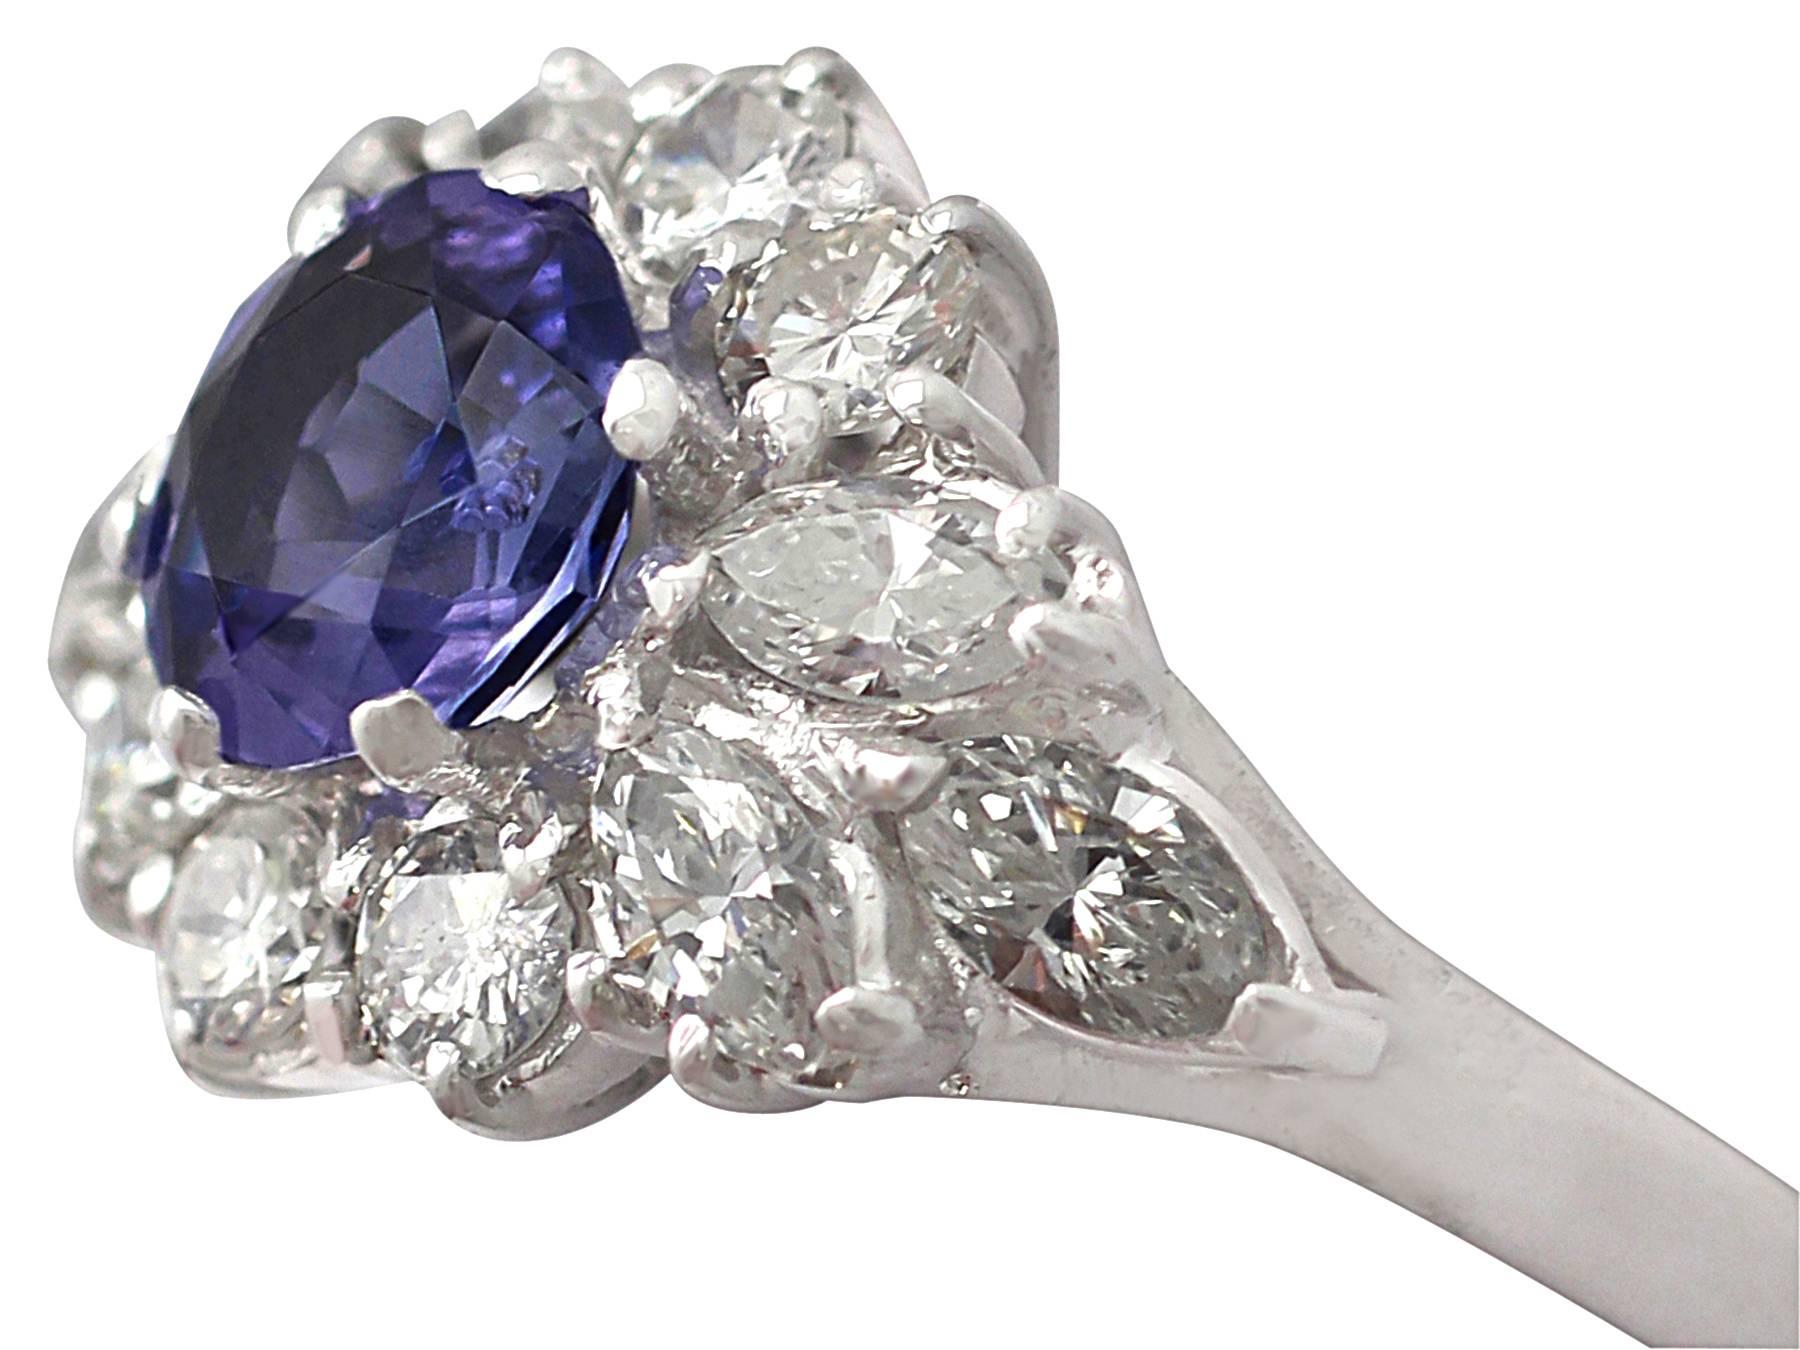 A stunning, fine and impressive vintage 1.65 carat diamond and 1.15 carat natural blue sapphire cluster ring in 18 karat white gold; part our vintage jewelry and estate jewelry collections

This stunning vintage sapphire cluster ring has been